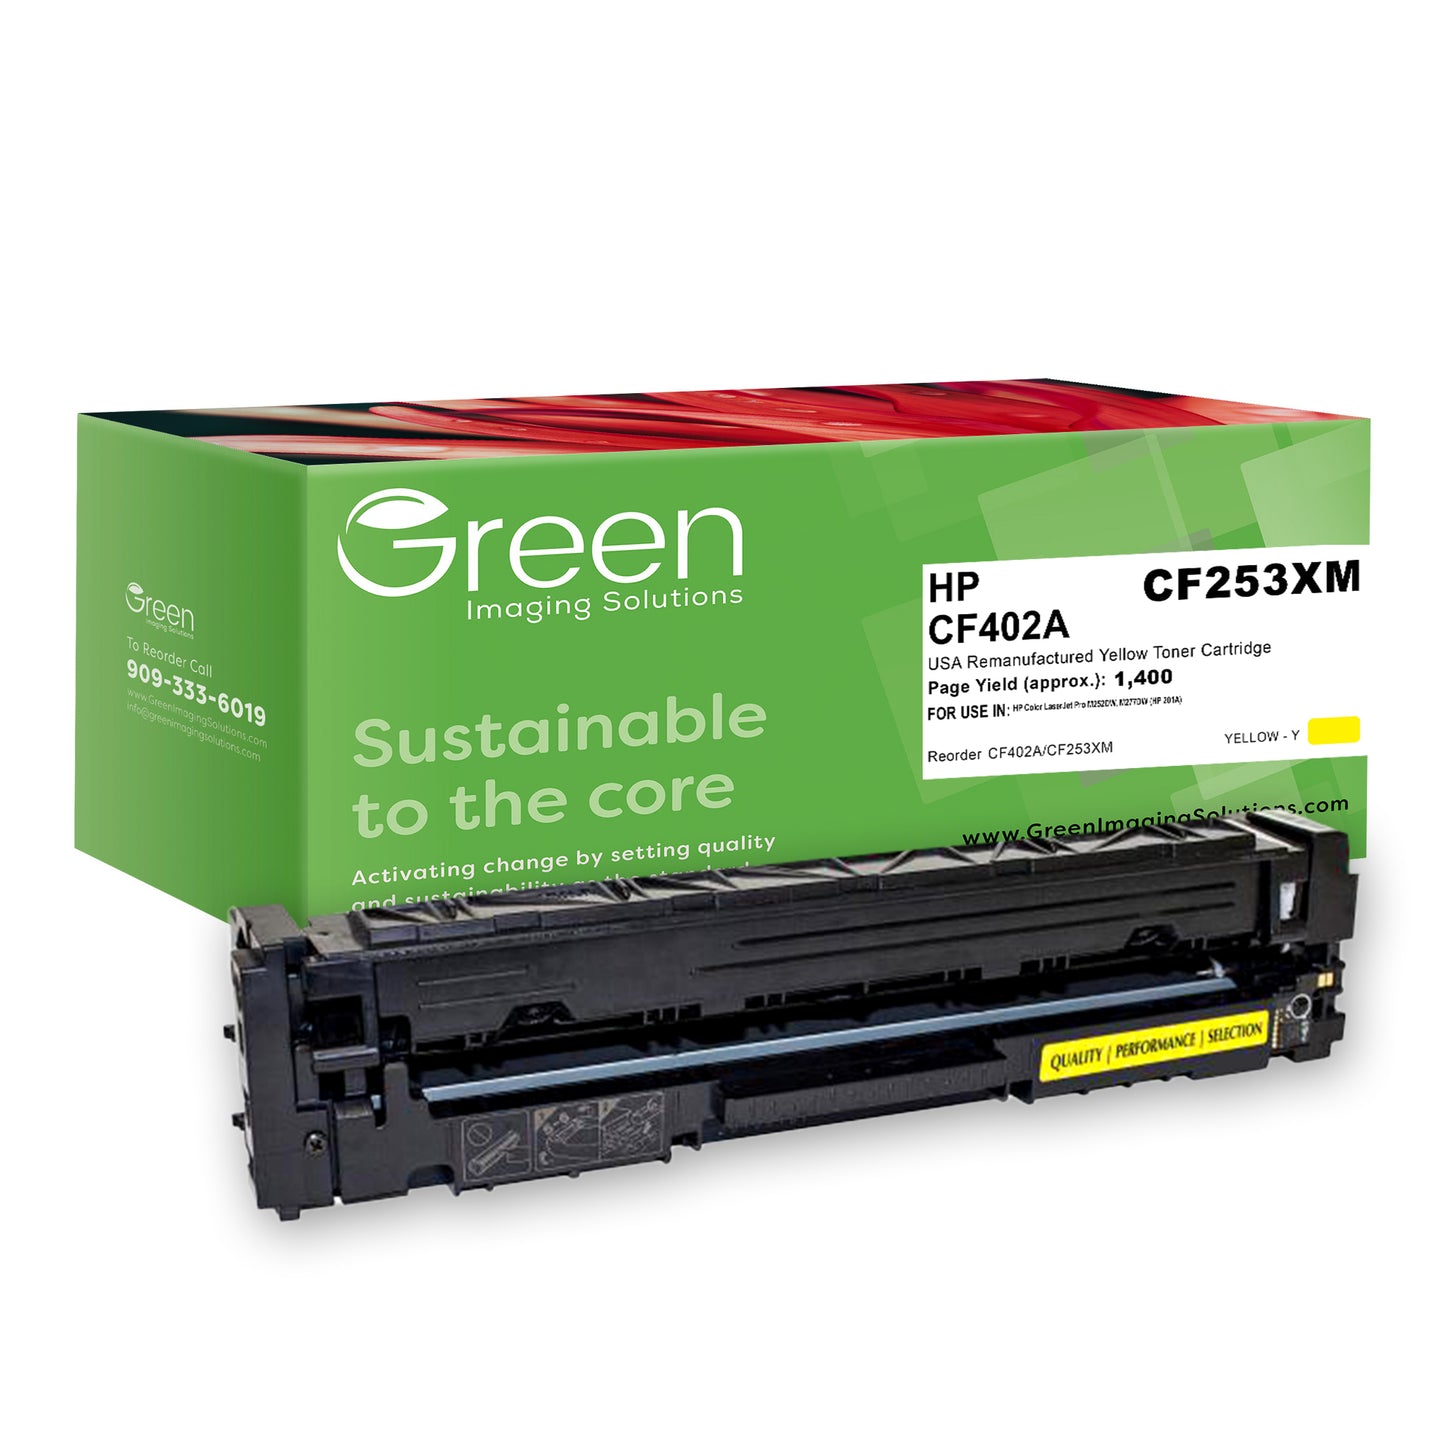 GIS USA Remanufactured Yellow Toner Cartridge for HP CF402A (HP 201A)